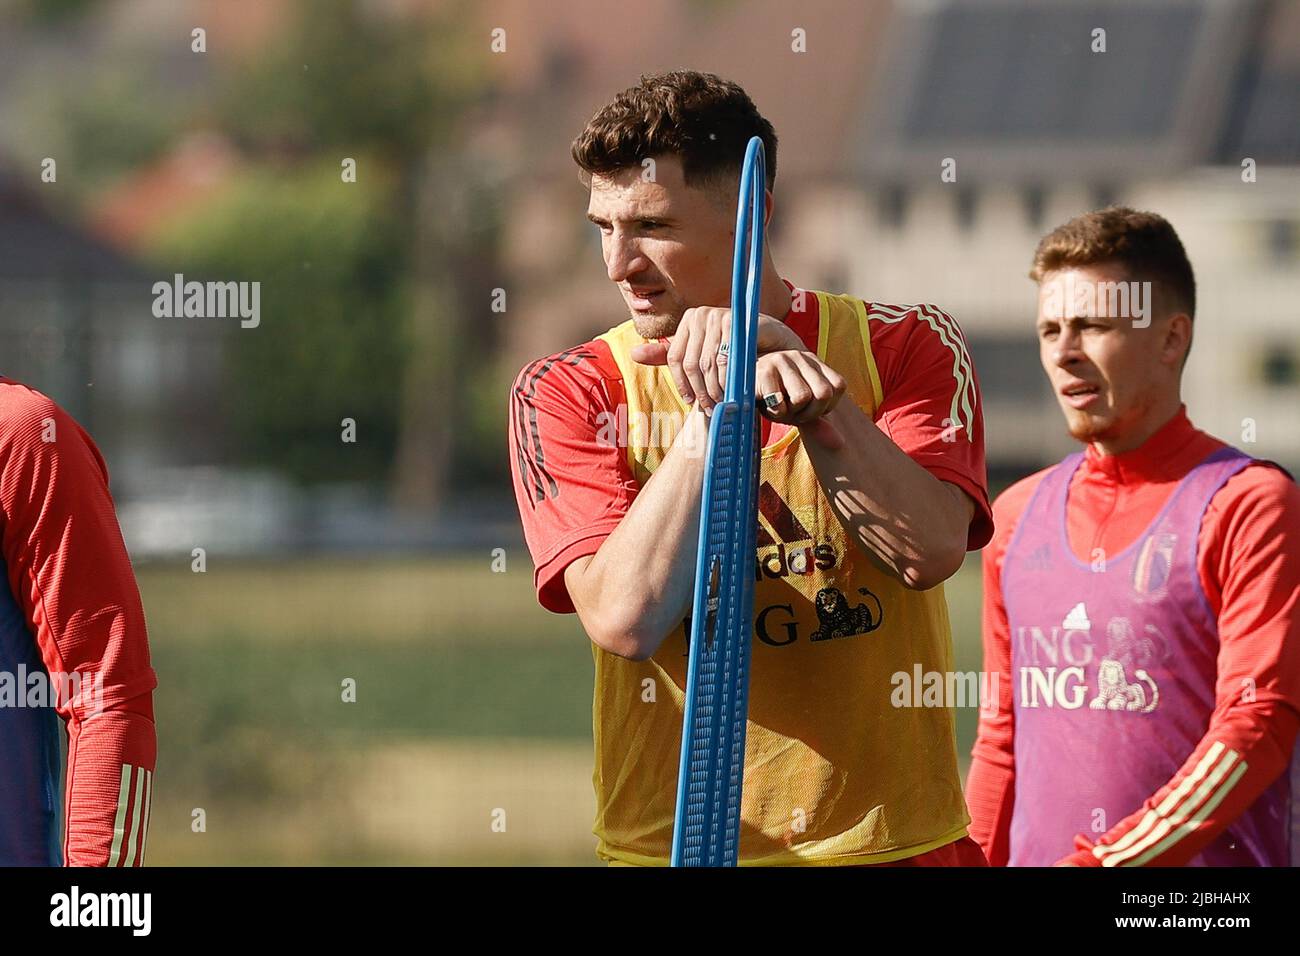 Belgium's Thomas Meunier pictured during a training session of the Belgian national team, the Red Devils, Monday 06 June 2022 in Tubize, during the preparations for the upcoming UEFA Nations League matches. BELGA PHOTO BRUNO FAHY Stock Photo